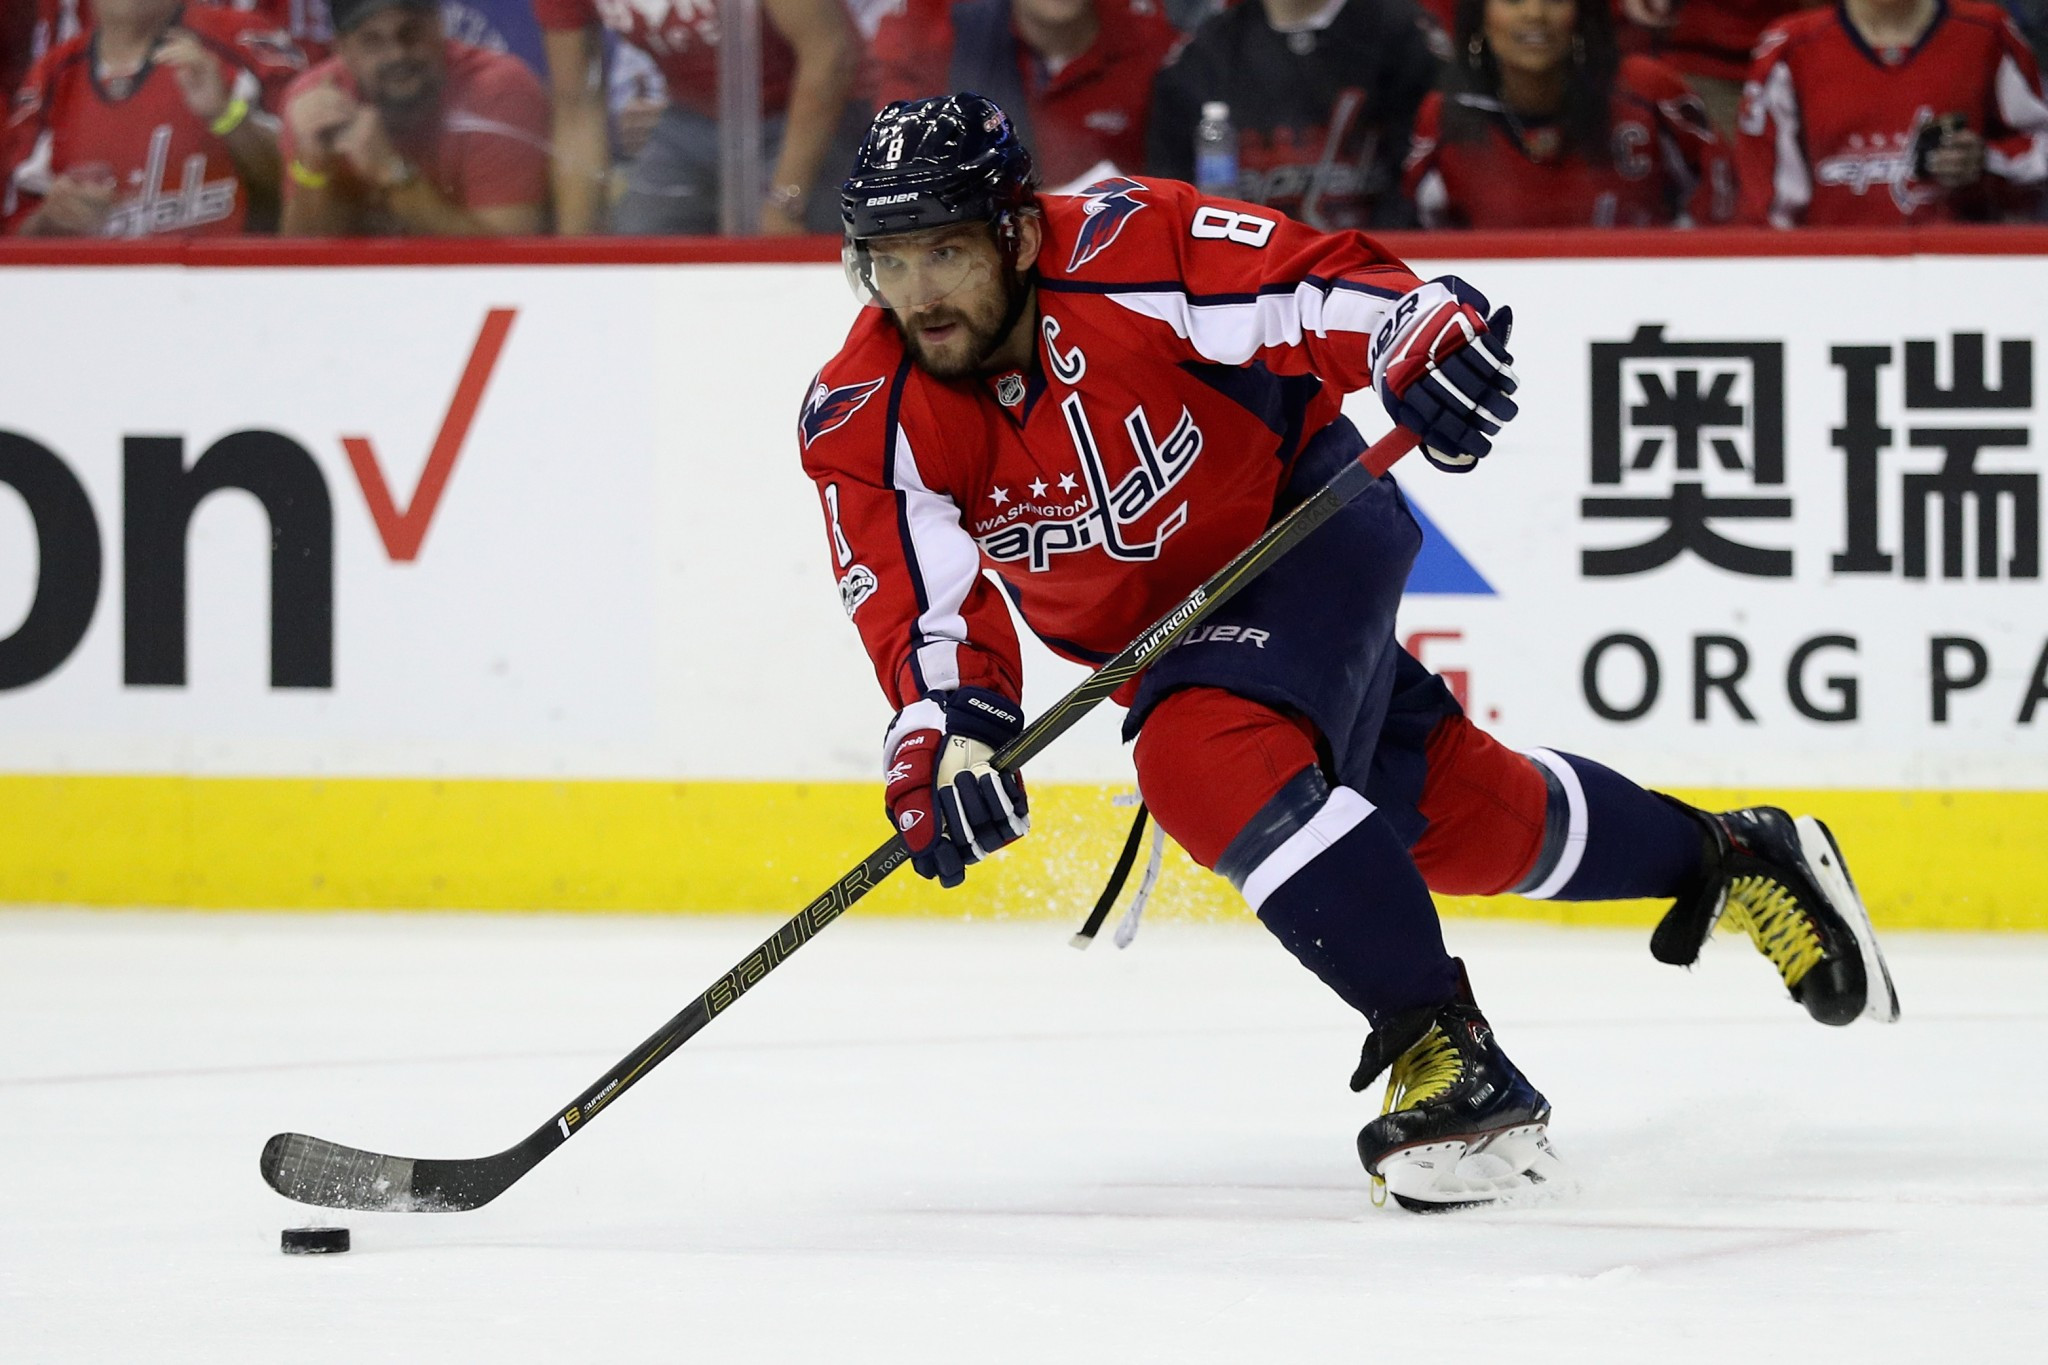 Alexander Ovechkin had claimed he would travel to South Korea regardless of whether the NHL participates ©Getty Images